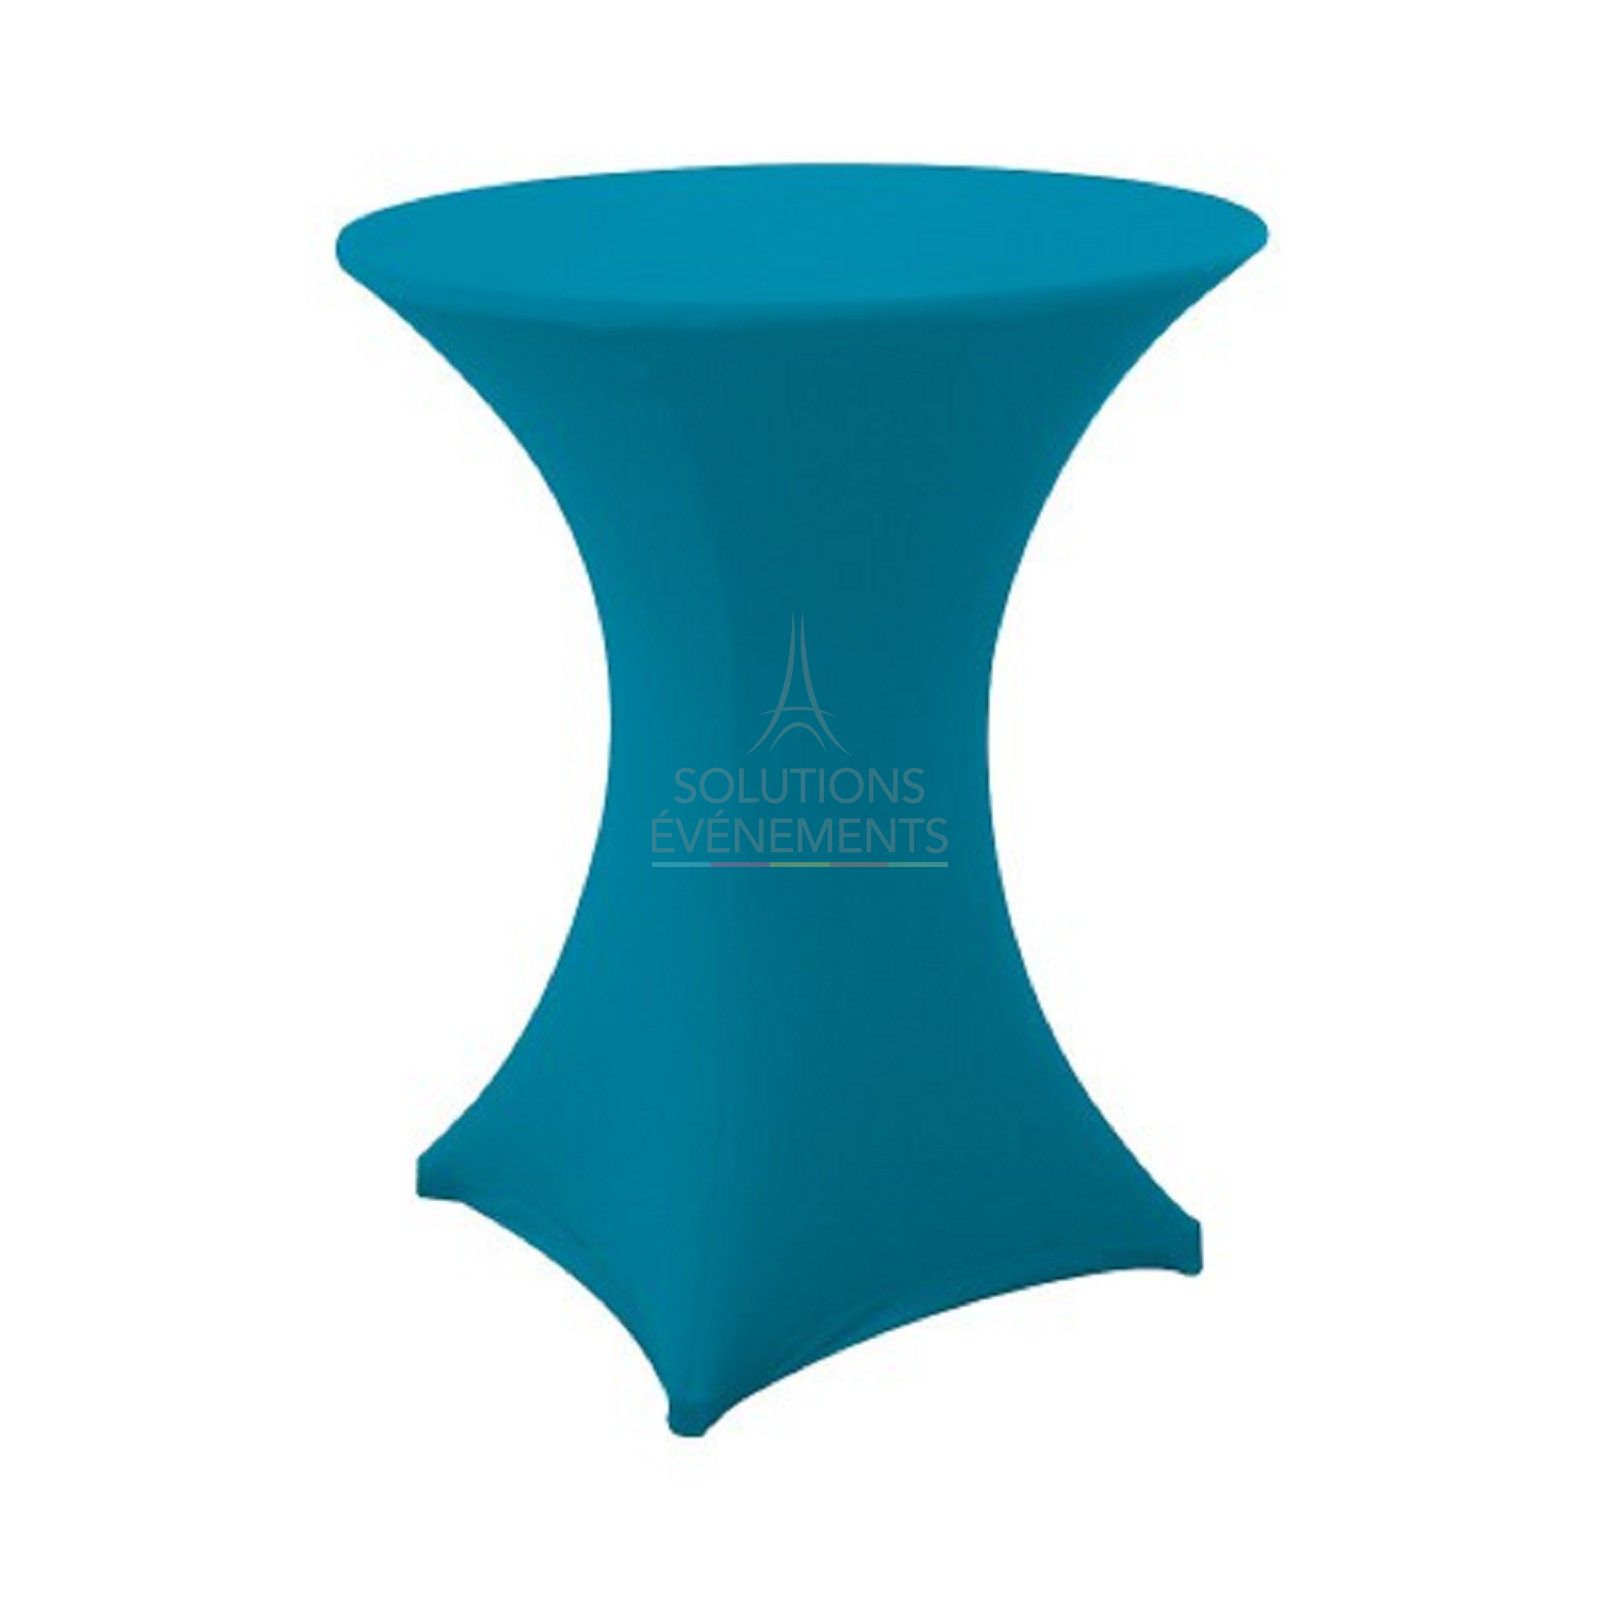 Rental of high standing dining table. Turquoise